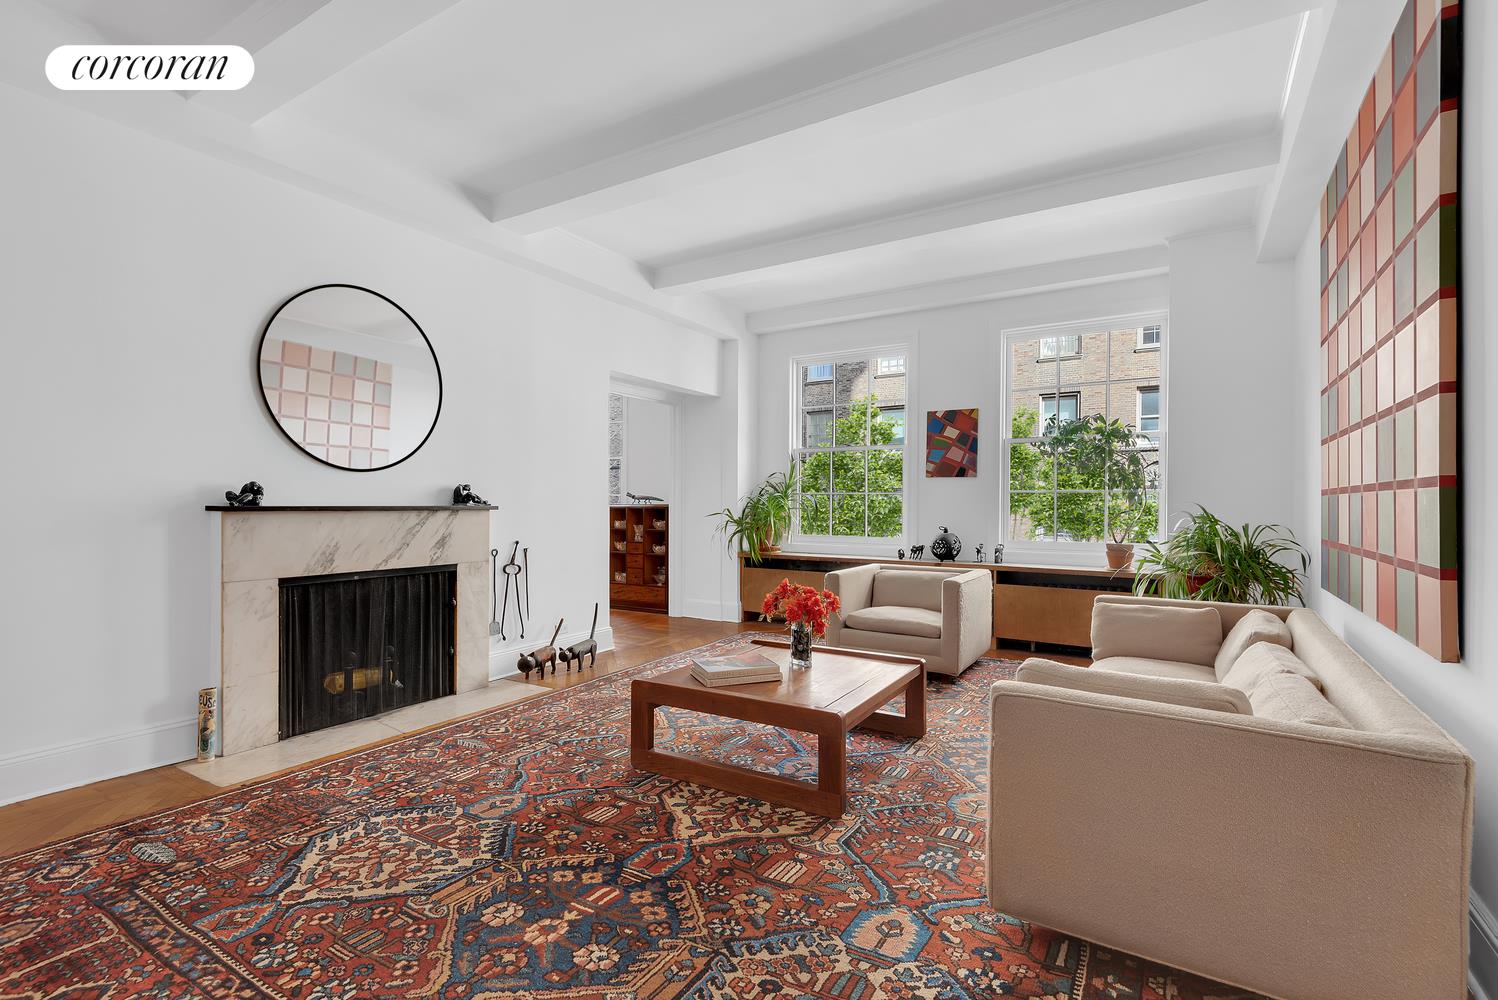 1165 5th Avenue 5C, Carnegie Hill, Upper East Side, NYC - 3 Bedrooms  
3 Bathrooms  
8 Rooms - 